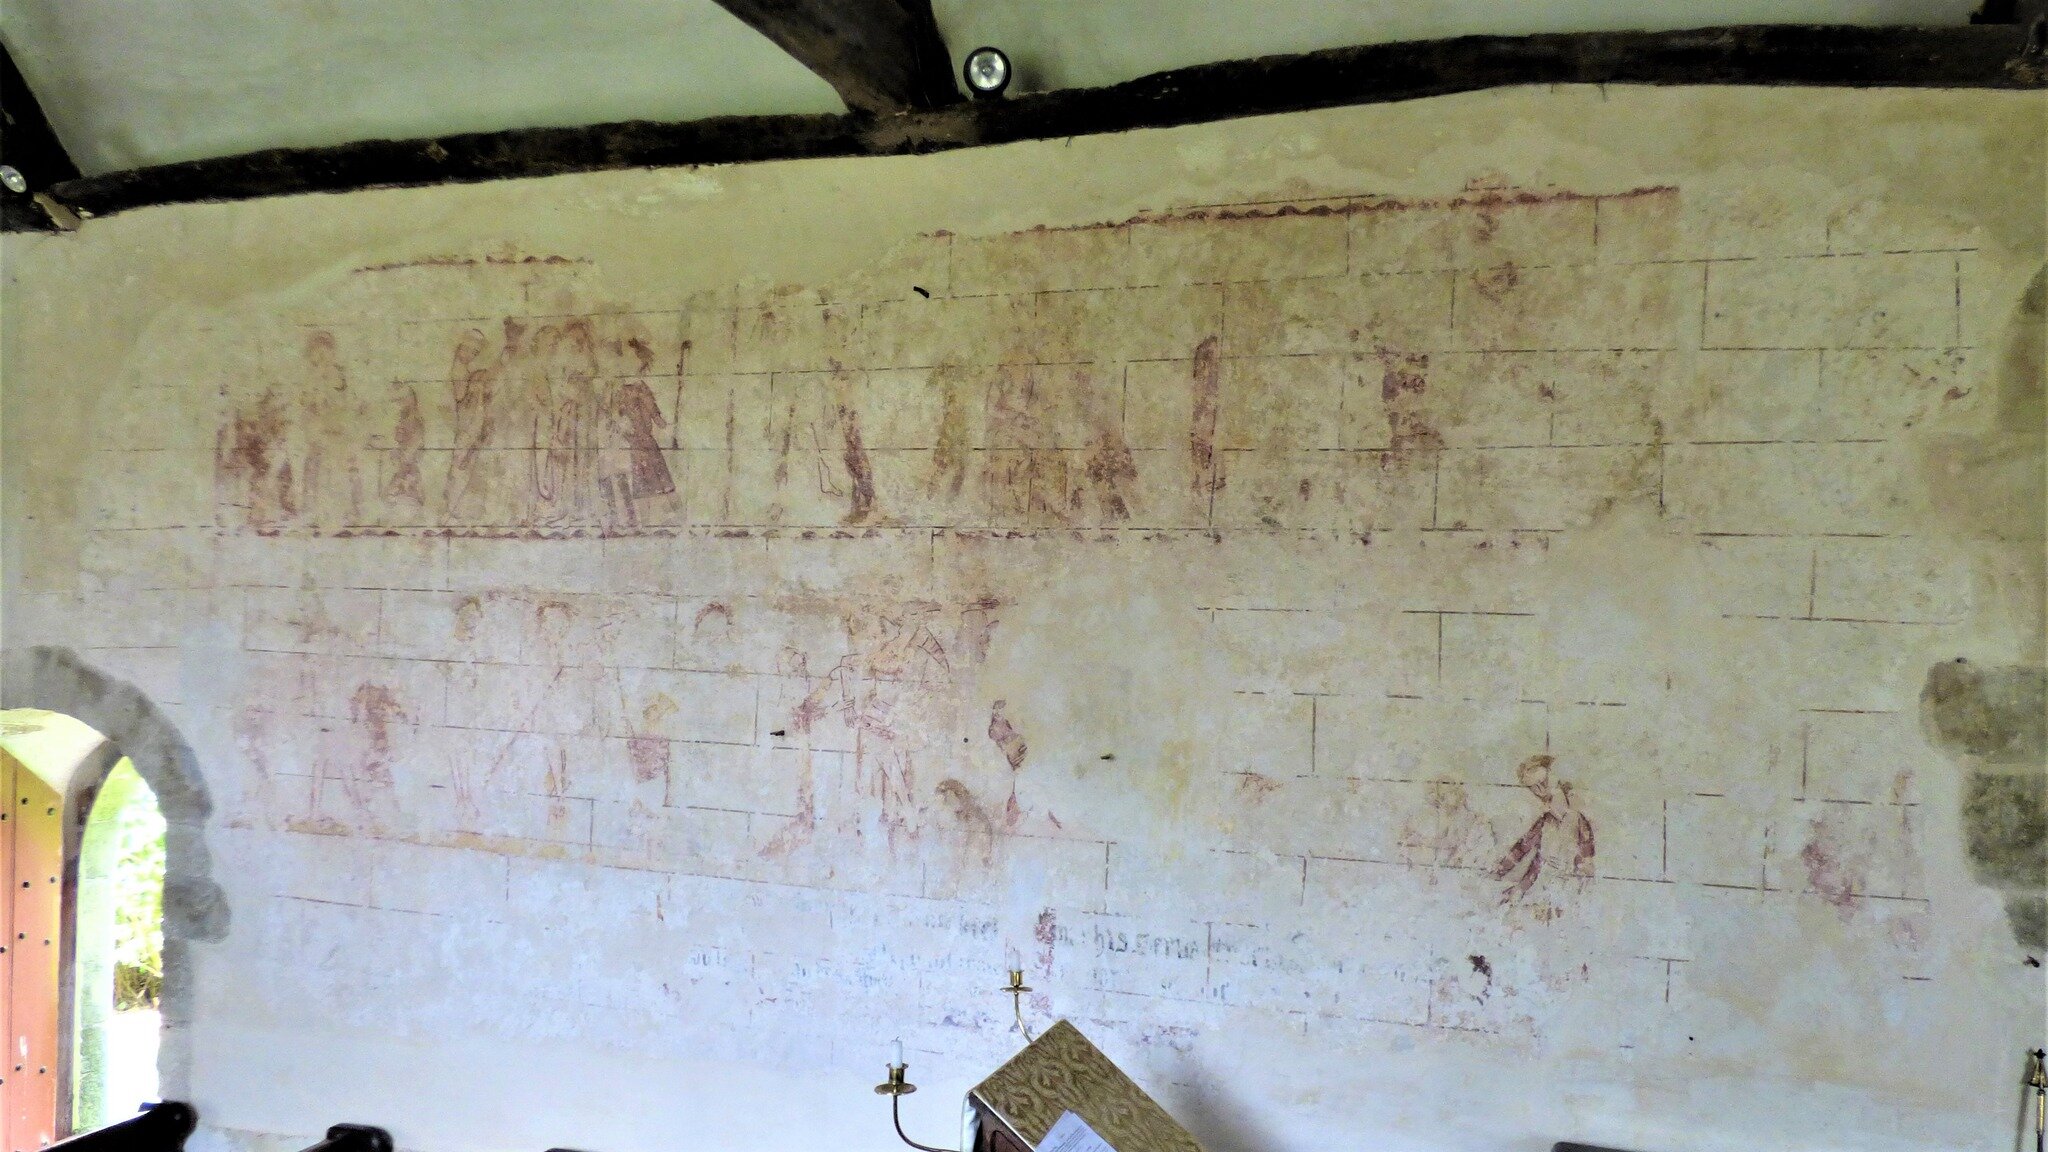 We had the pleasure of surveying Gussage St Andrew Church in Dorset for their routine quinquennial.

The simple Norman church has a few interesting features including a 13th century wall painting of The Passion plus, a tomb under the altar of a man w